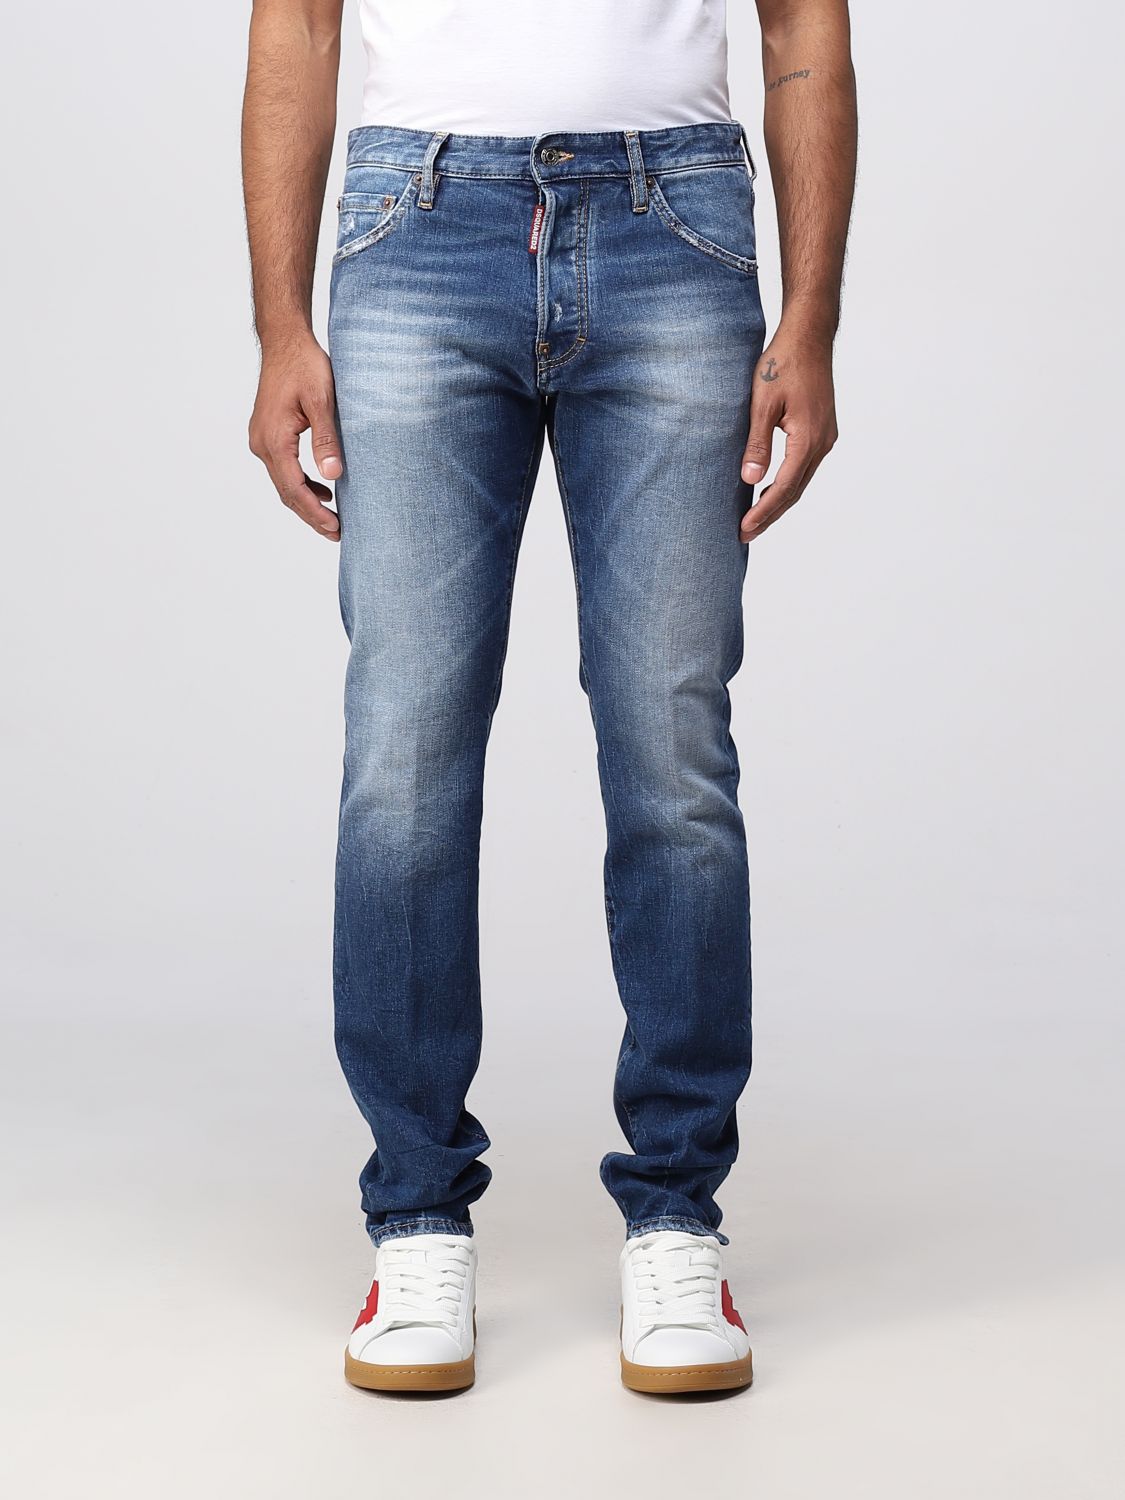 jeans for man - Blue | Dsquared2 jeans S71LB1159S30663 online GIGLIO.COM